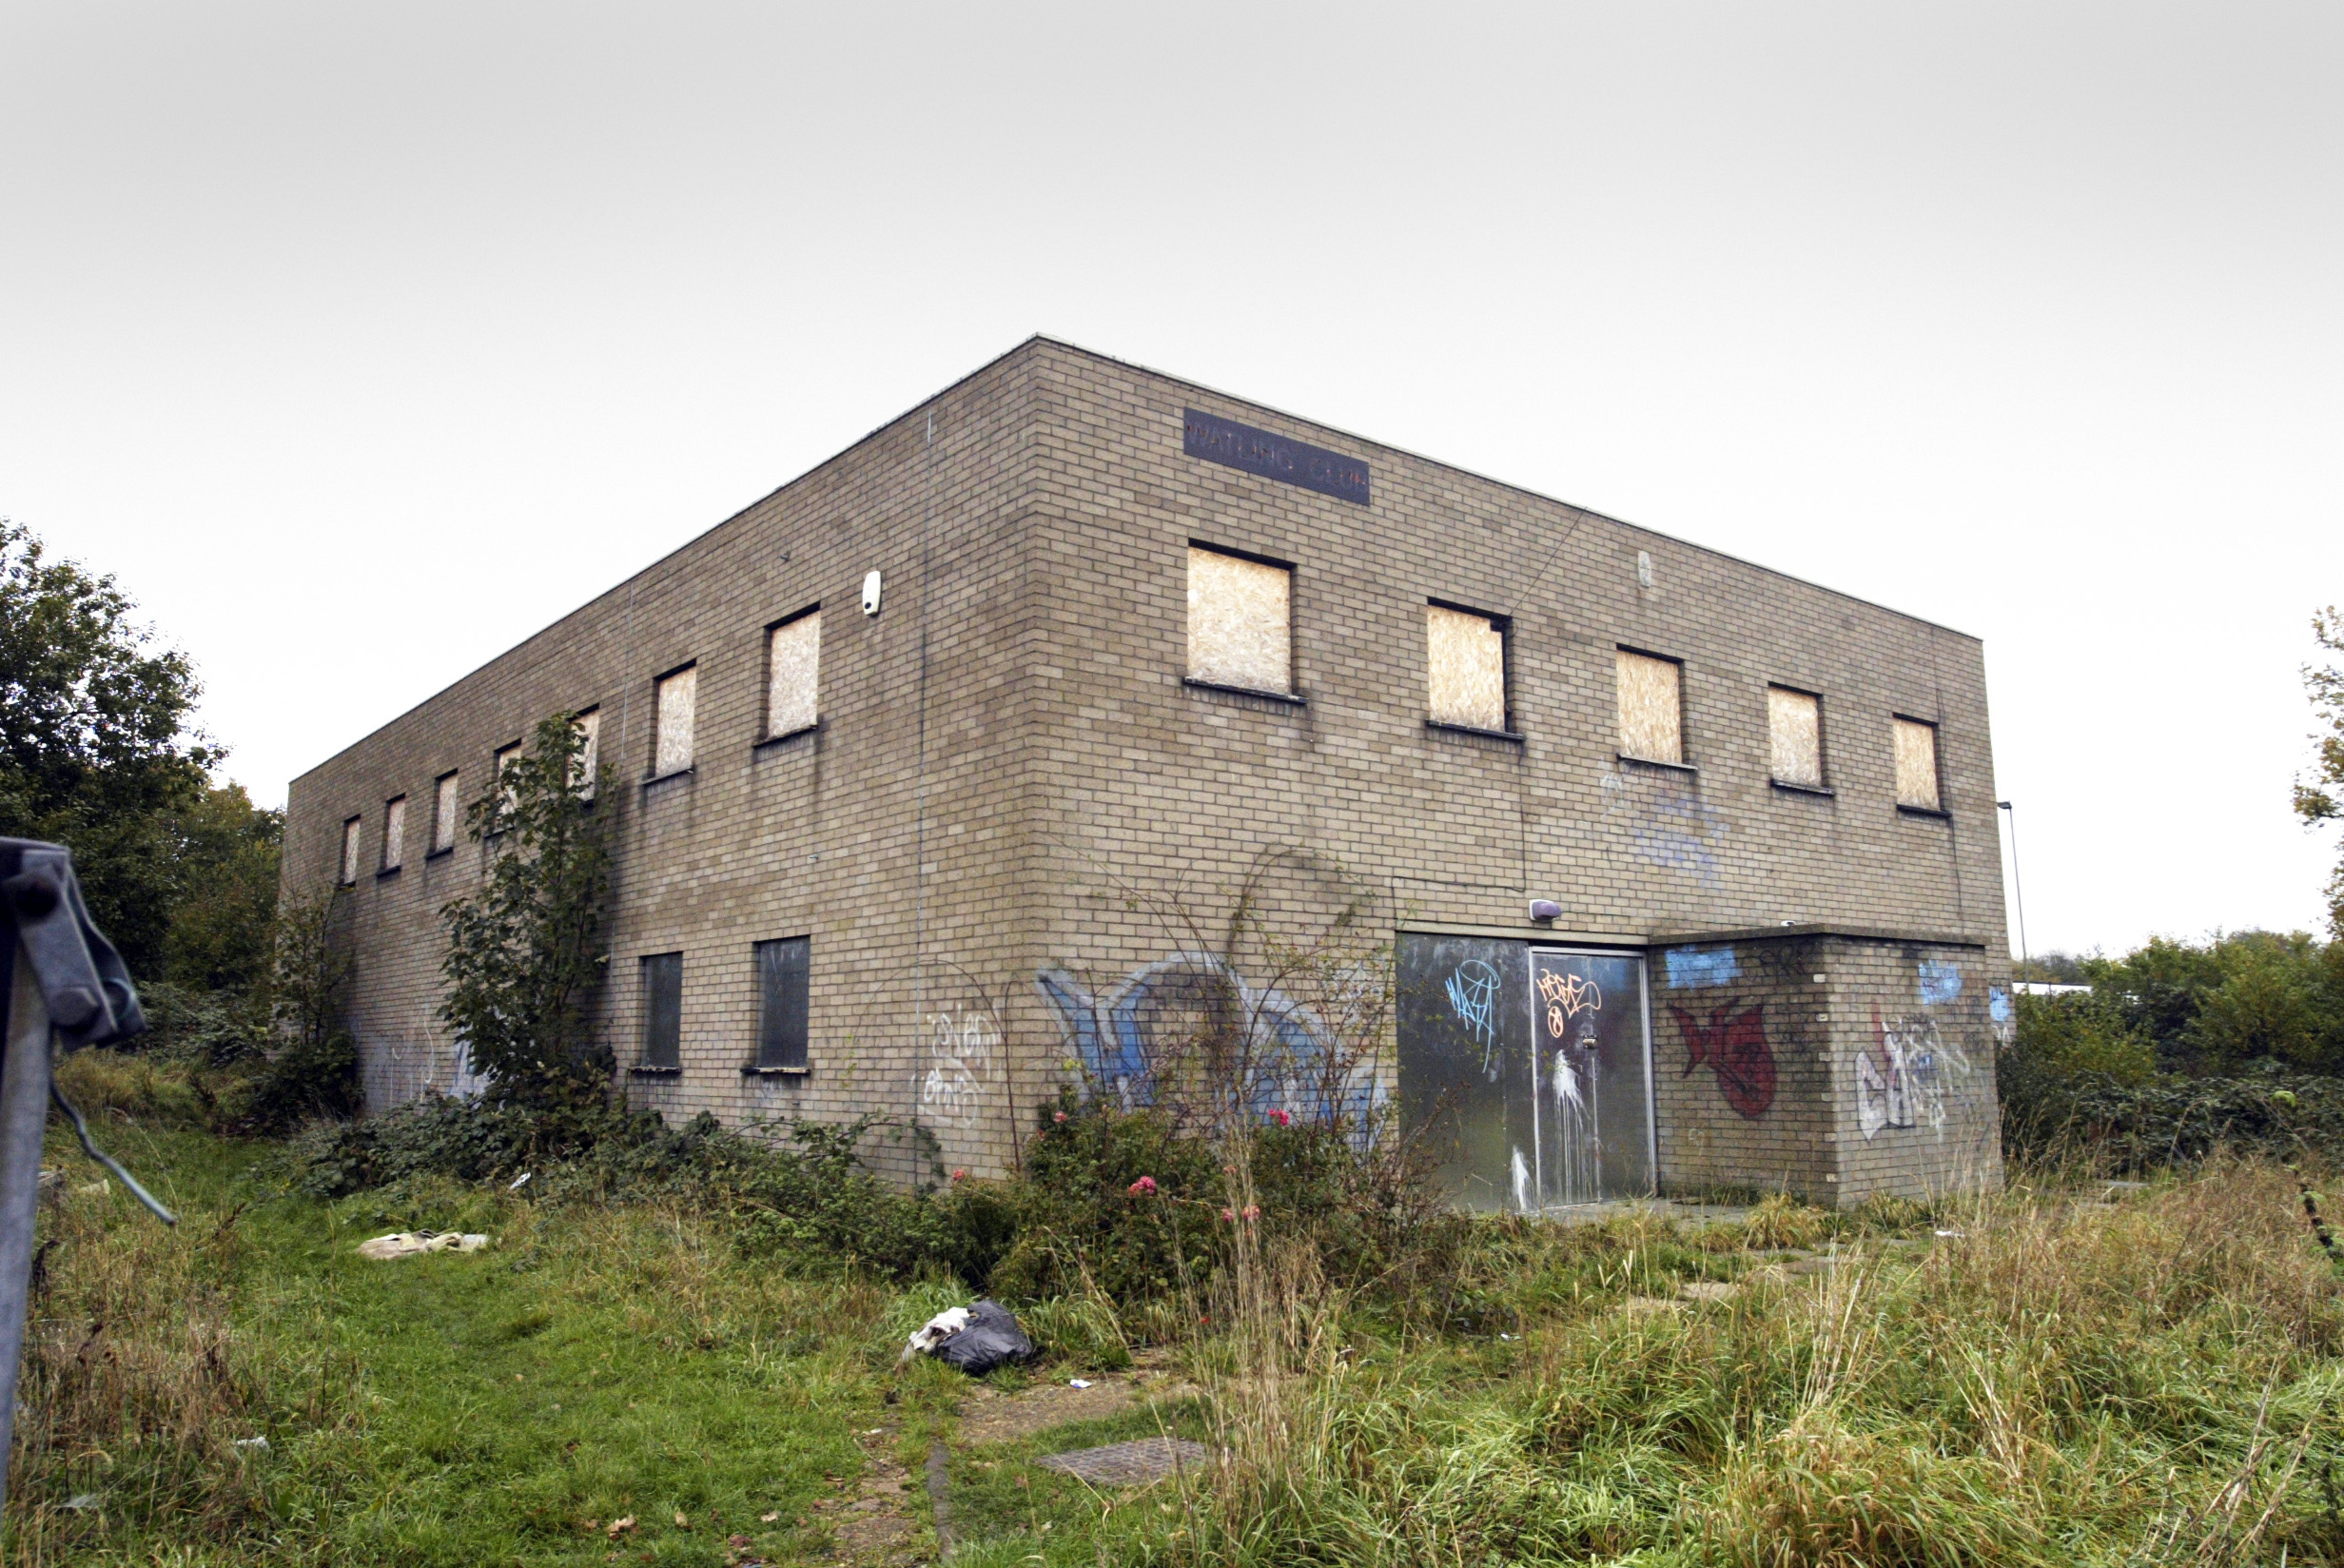 Vacant former community hall acquired unconditionally. Planning obtained for 20 private units and 4 affordable housing units. Dryfield Road, Edgware, London Borough of Barnet.